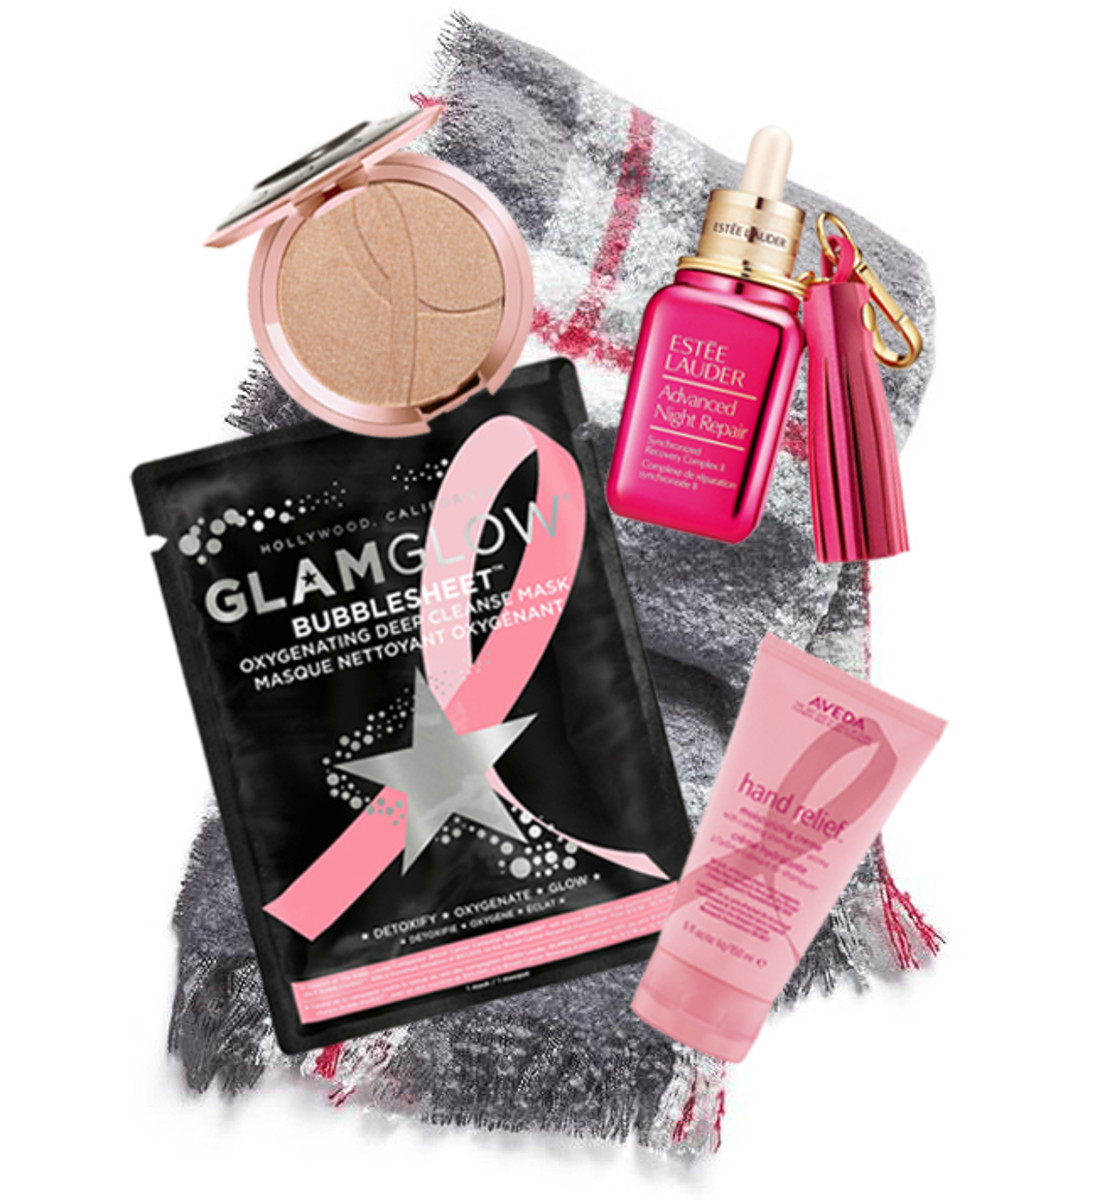 Breast Cancer Awareness beauty 2018